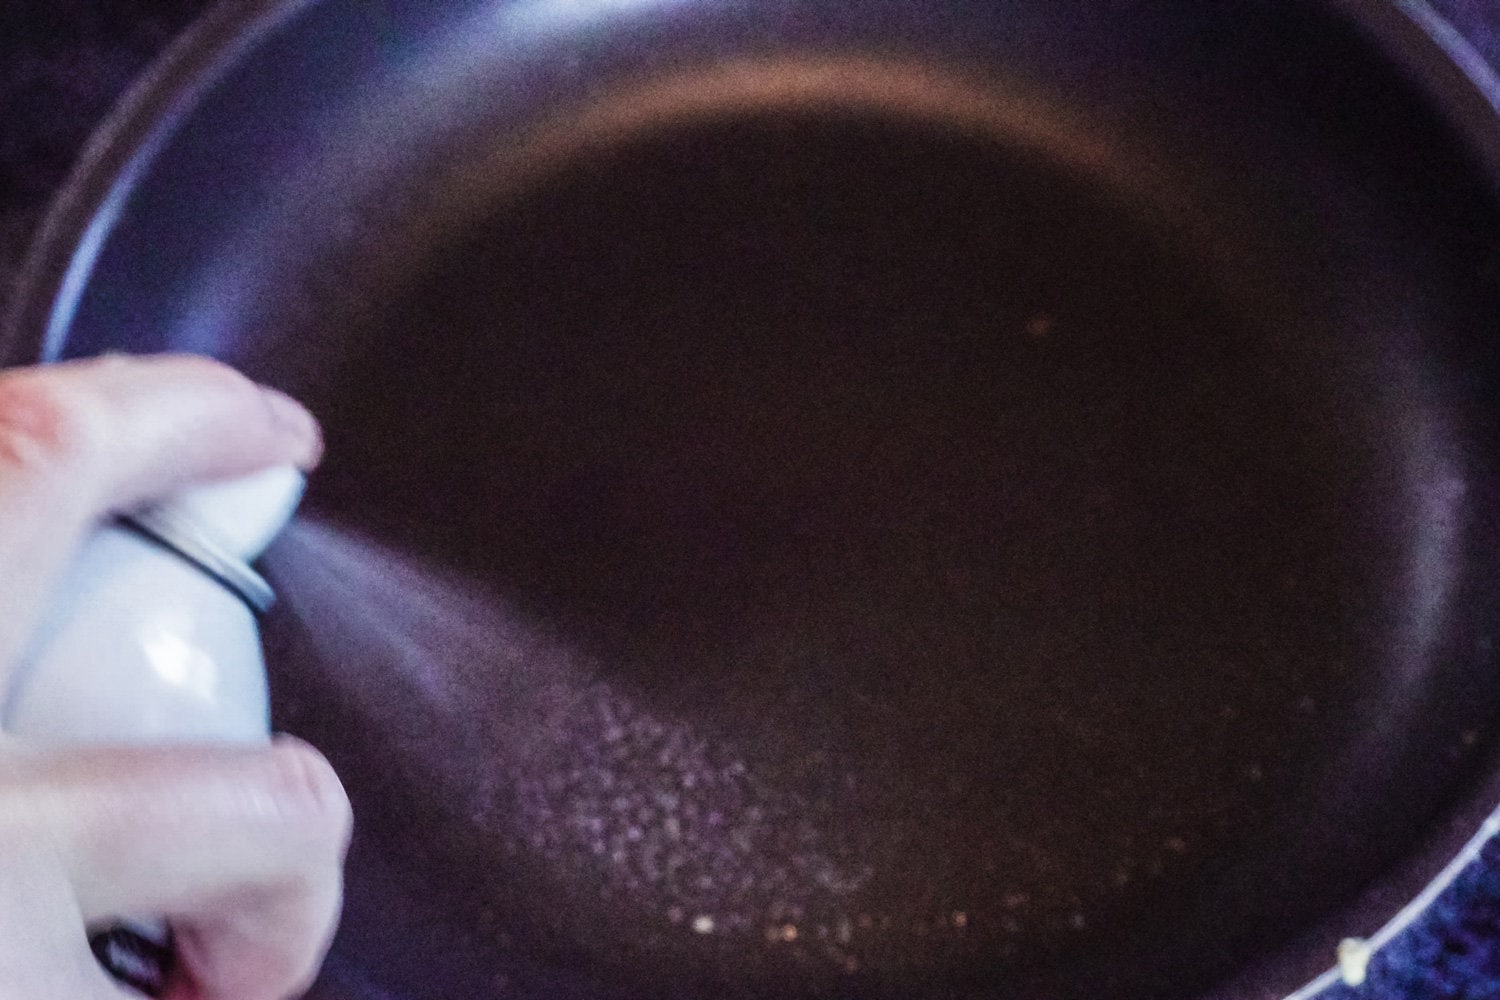 Step by step. Spraying cooking olive oil on frying pan to fry some pancakes.